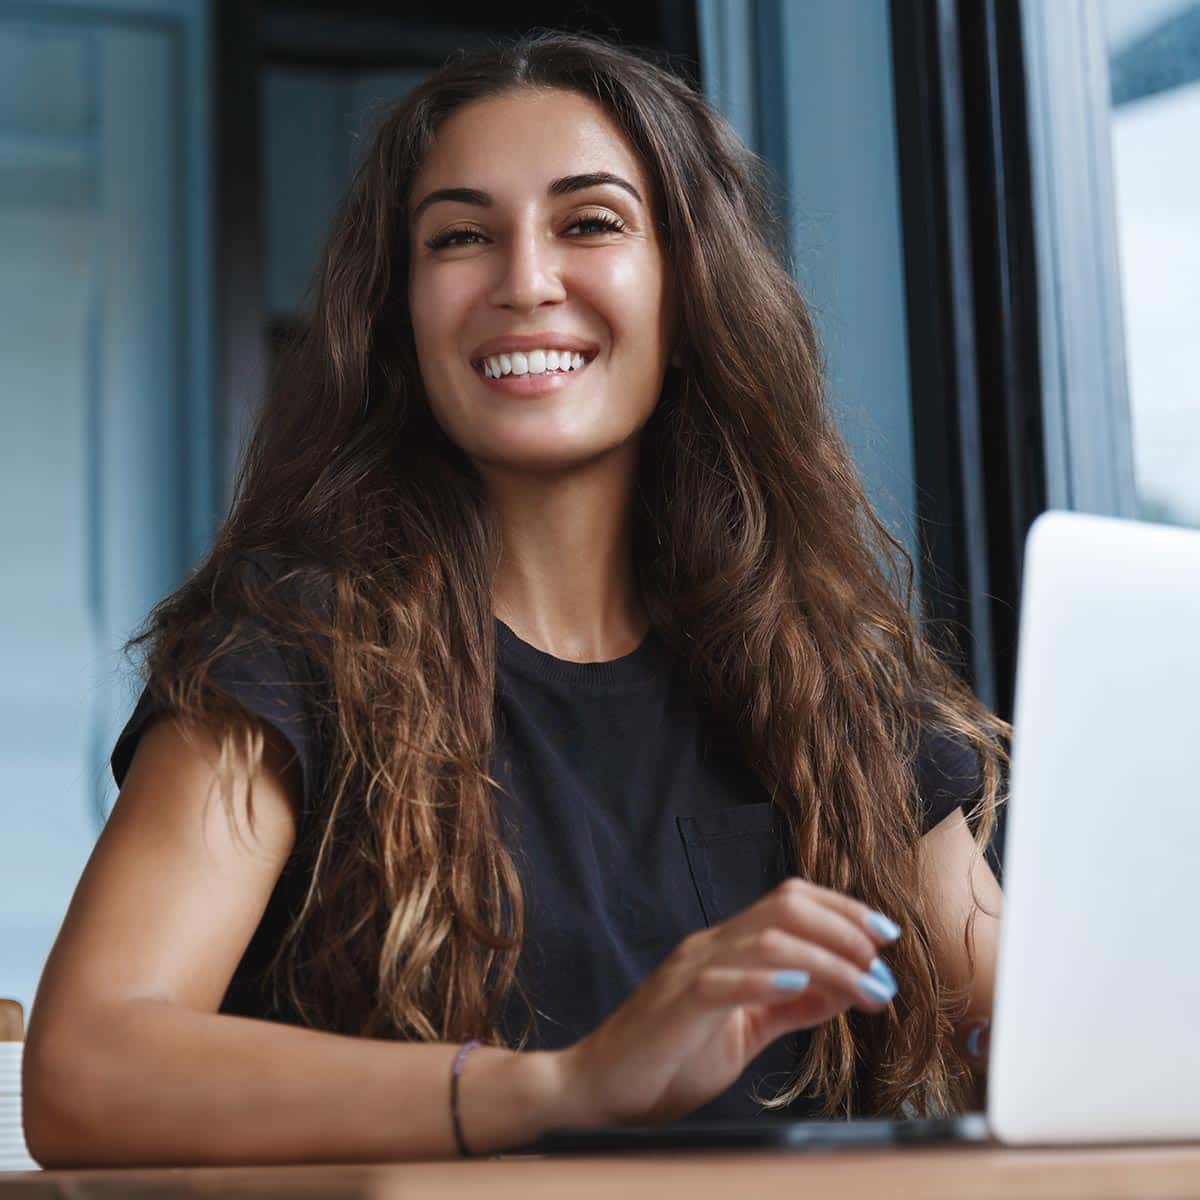 Woman Smiles At Camera While Working On A Computer.